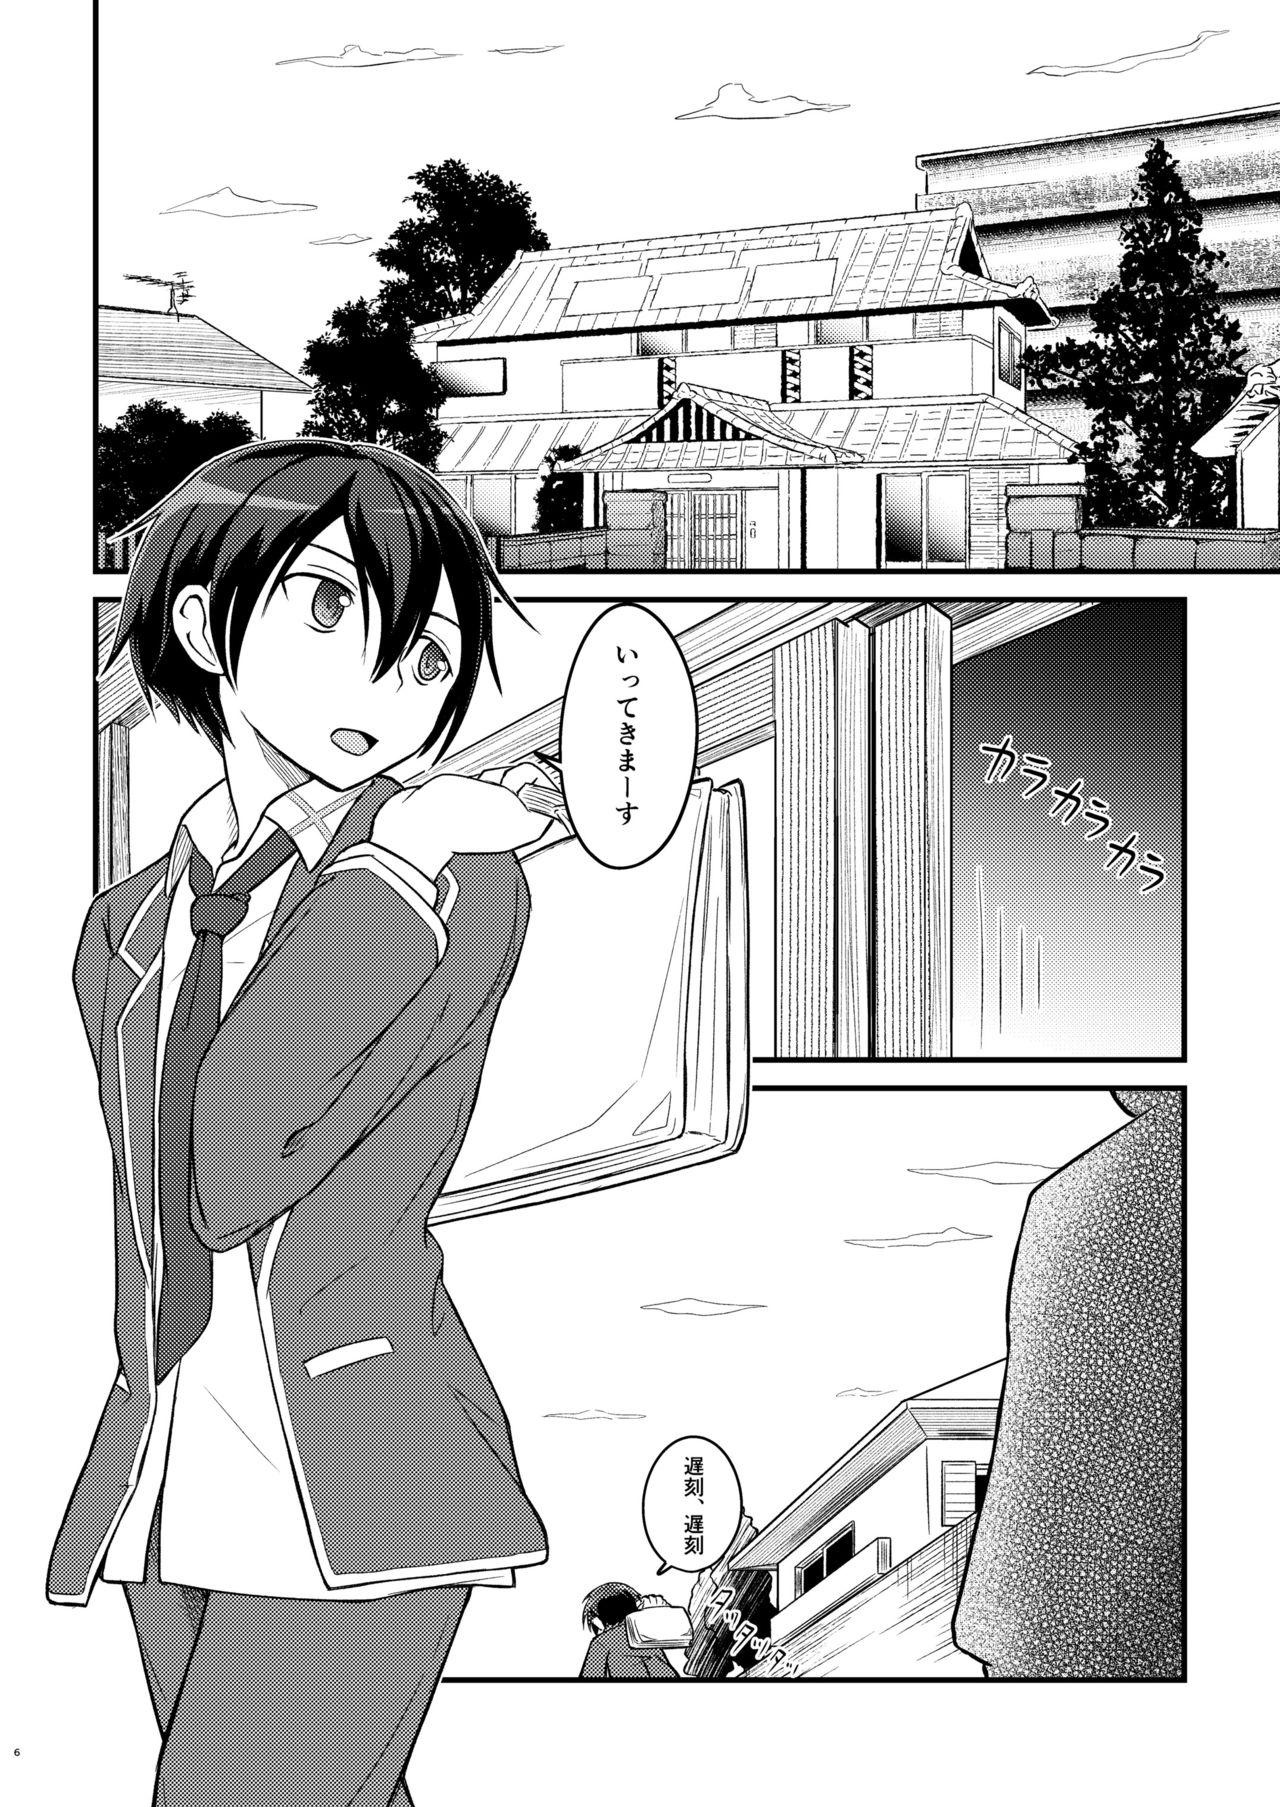 Young Tits Kiriko Route Another A Part Set - Sword art online Marido - Page 5